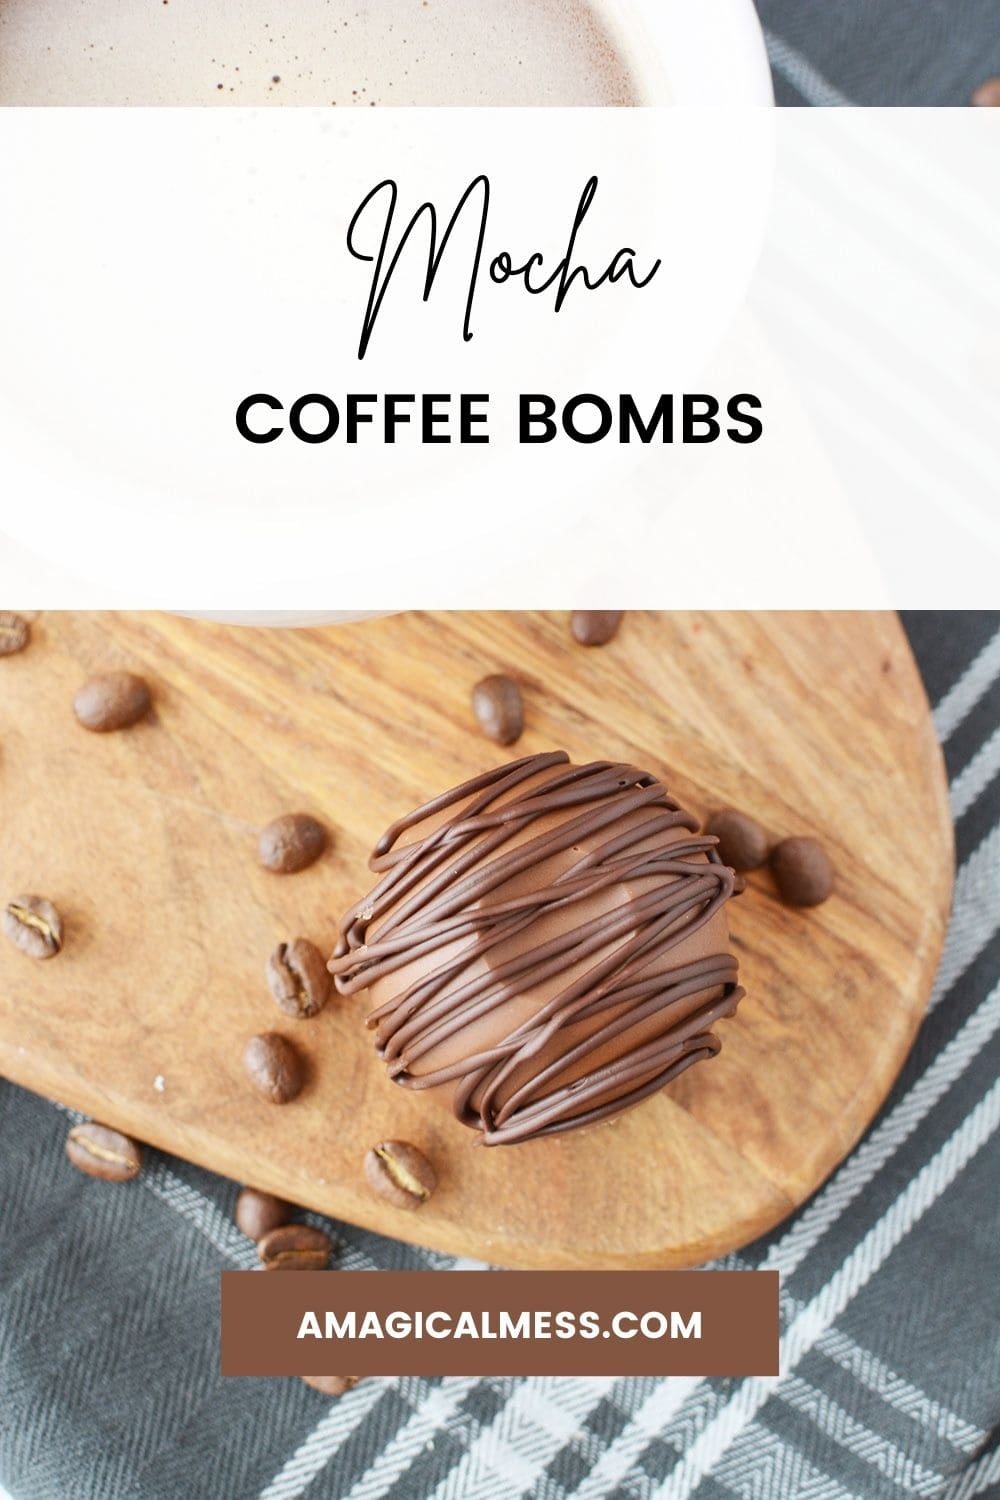 Brown candy coffee bomb sitting on a board with coffee beans.